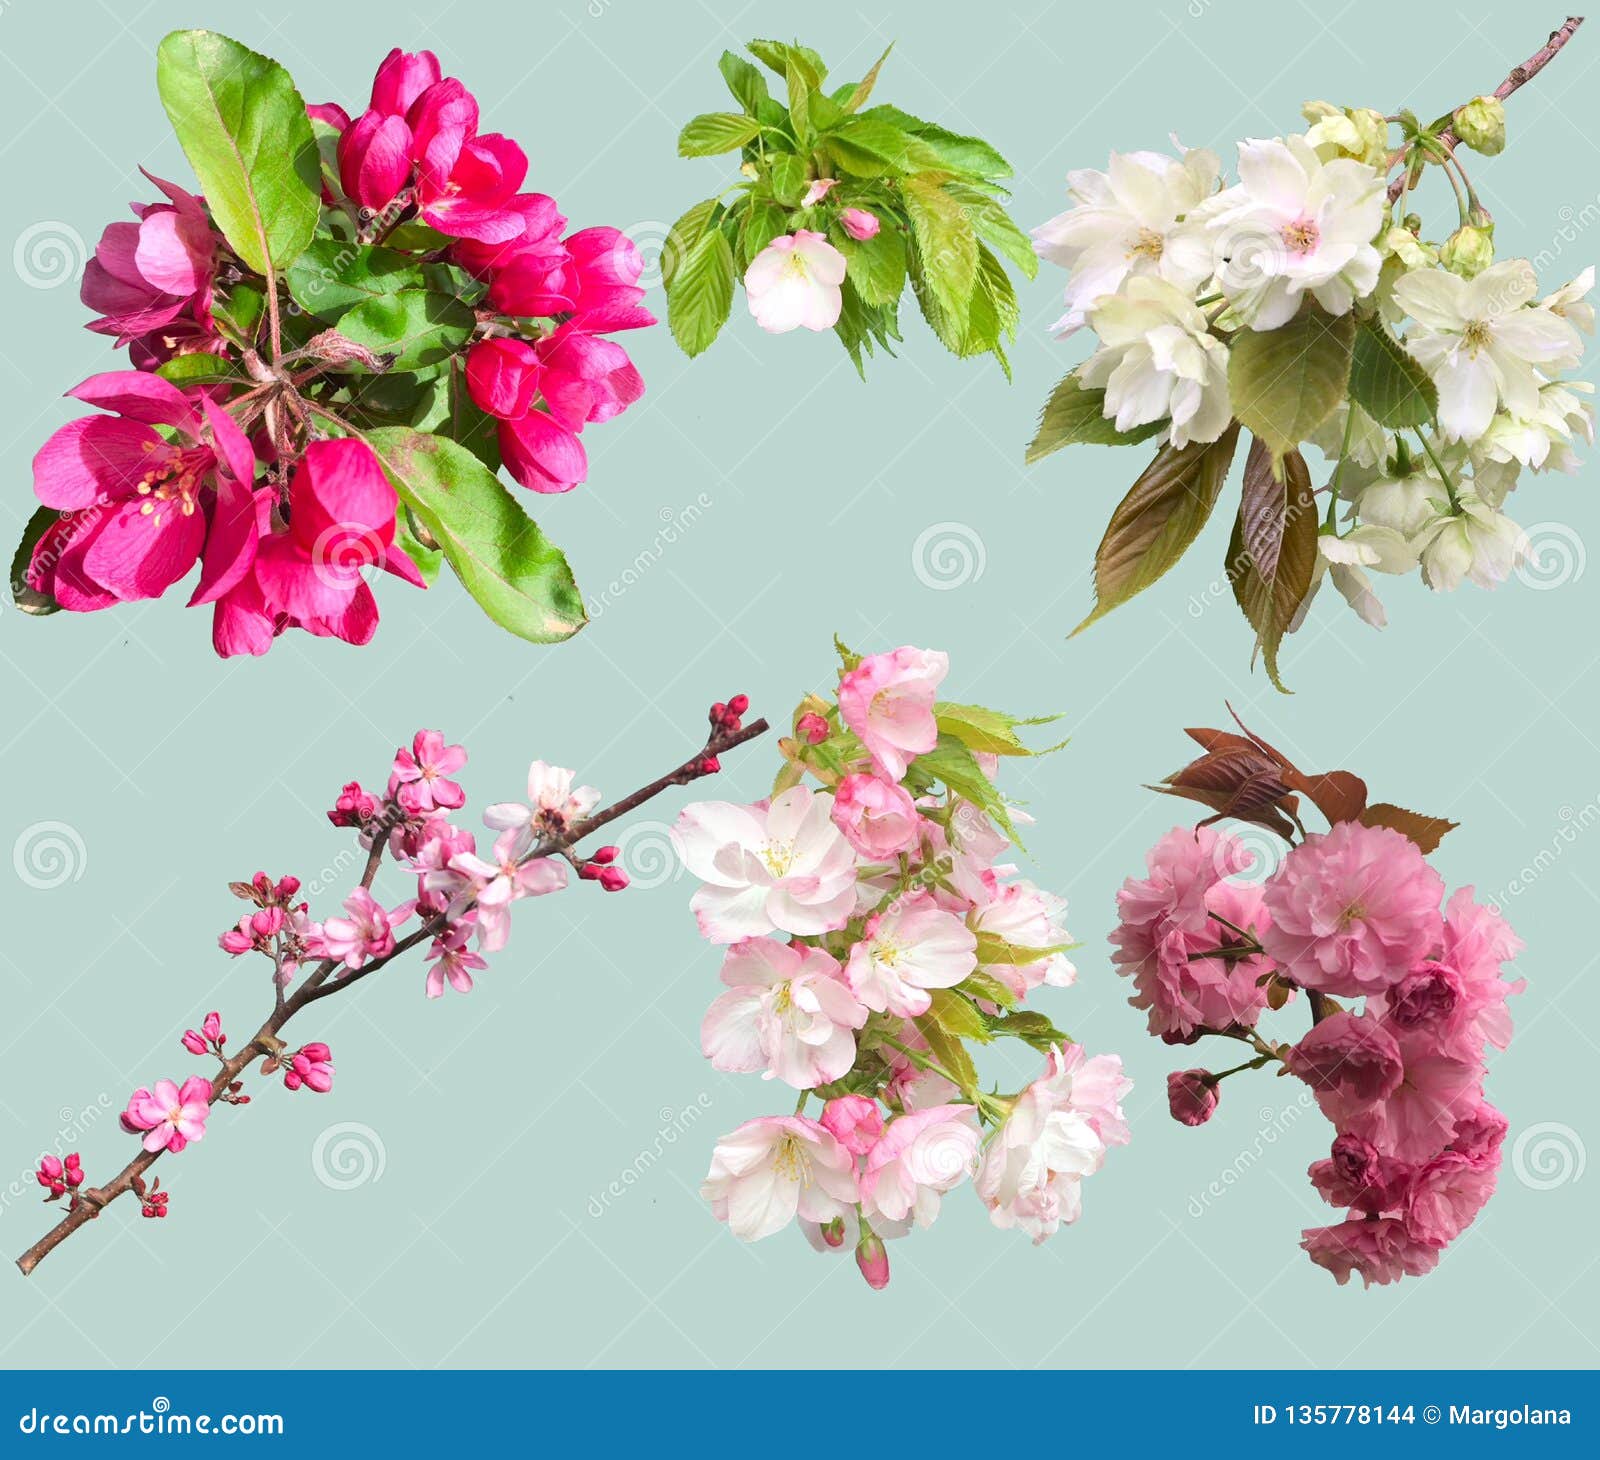 Blooming Garden Blossoms Of Collection Cherry And Apple Tree Stock Apple Blossom Flower Vs Cherry Blossom